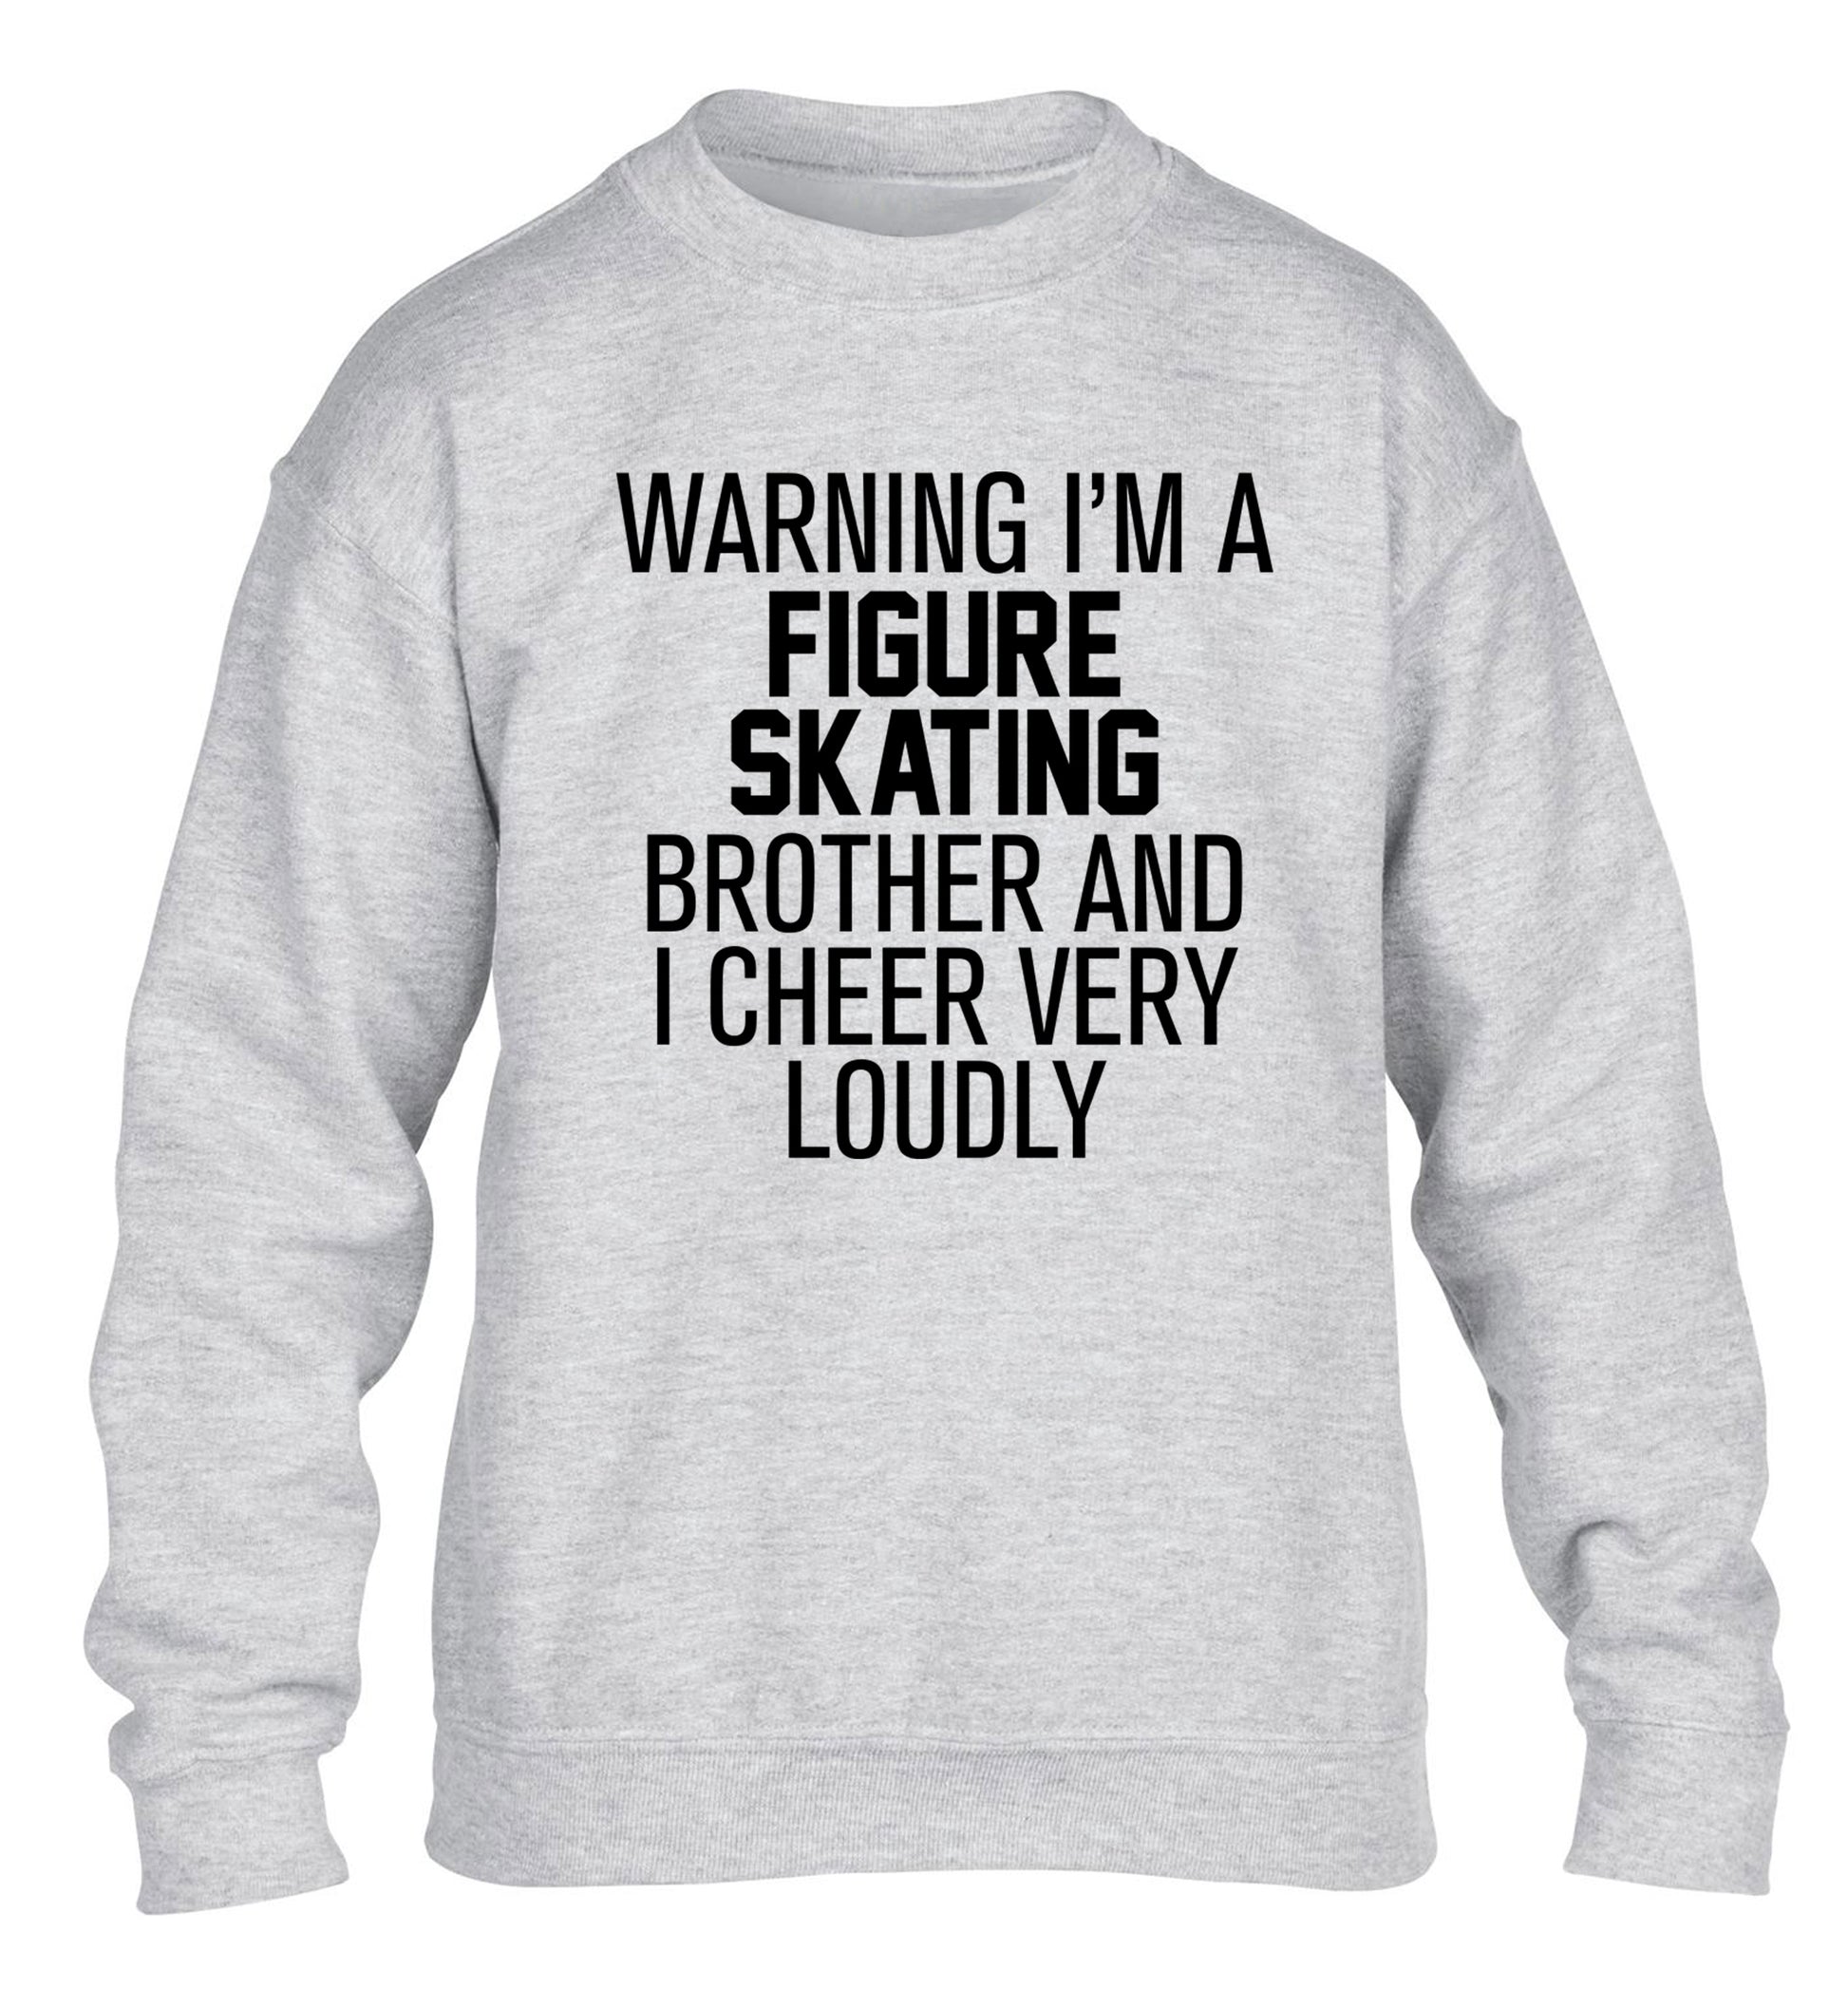 Warning I'm a figure skating brother and I cheer very loudly children's grey sweater 12-14 Years